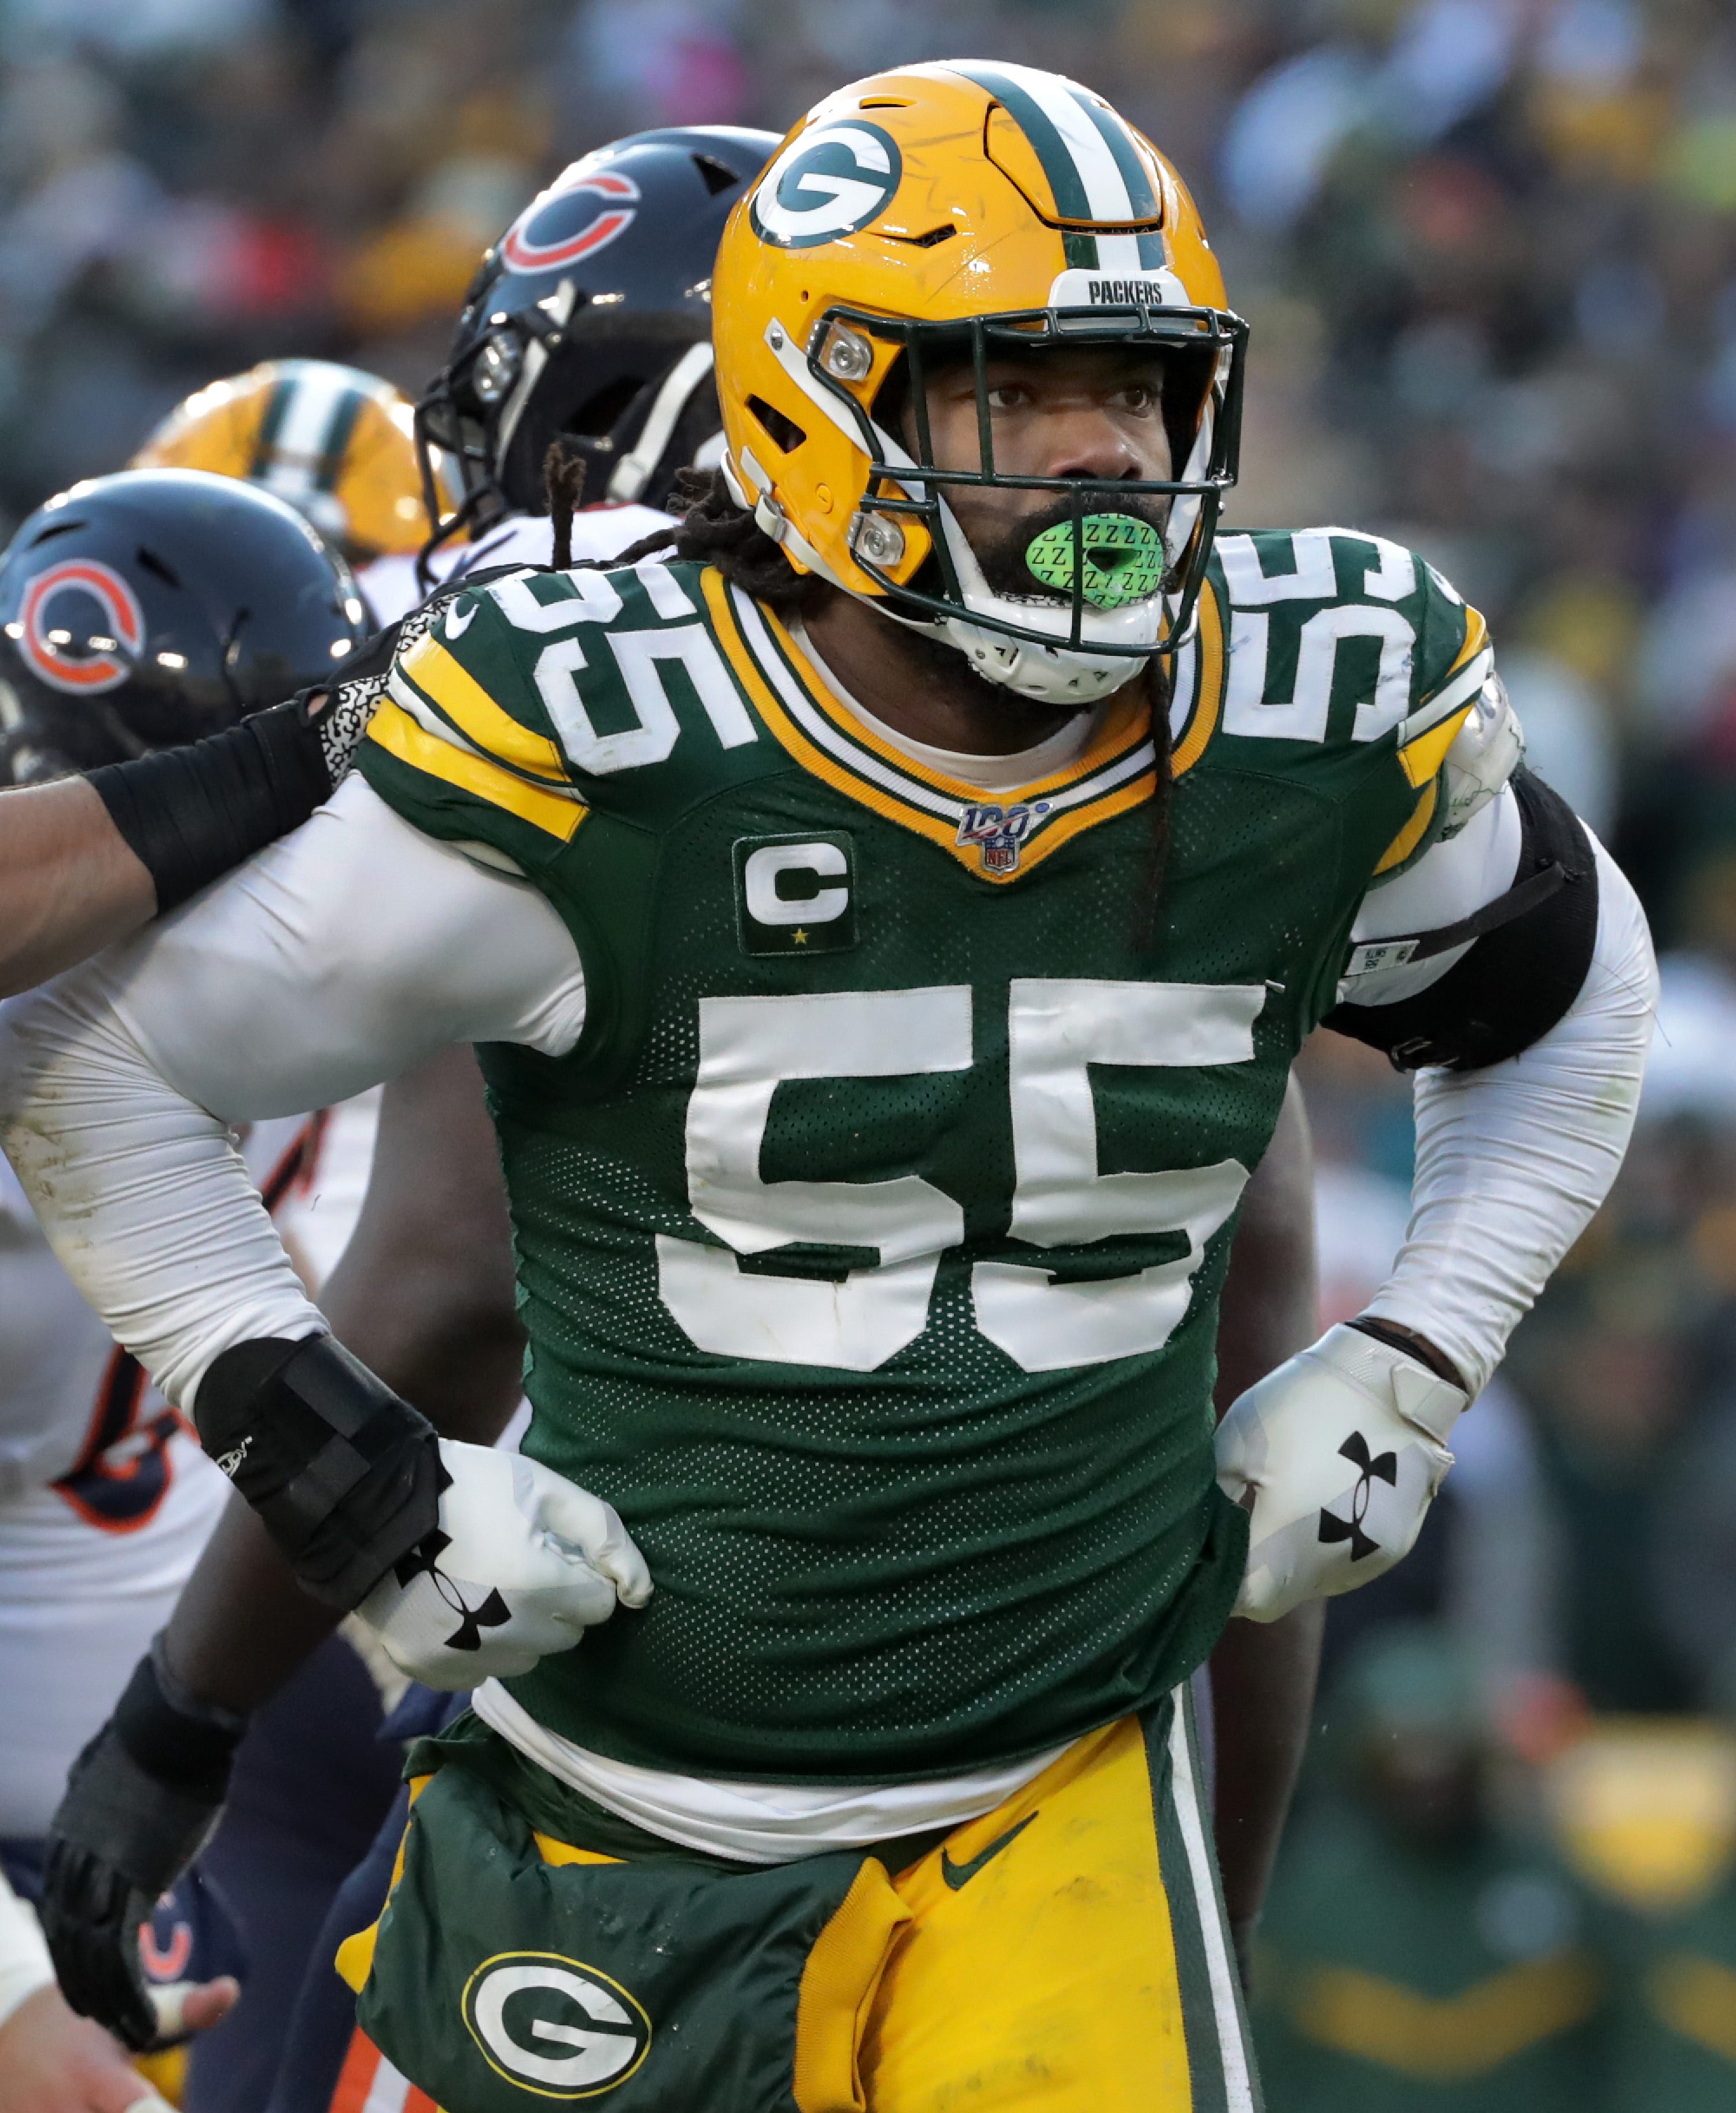 Green Bay Packers outside linebacker Za'Darius Smith (55) against the Chicago Bears during their football game on Sunday, December 15, 2019, at Lambeau Field in Green Bay, Wis.